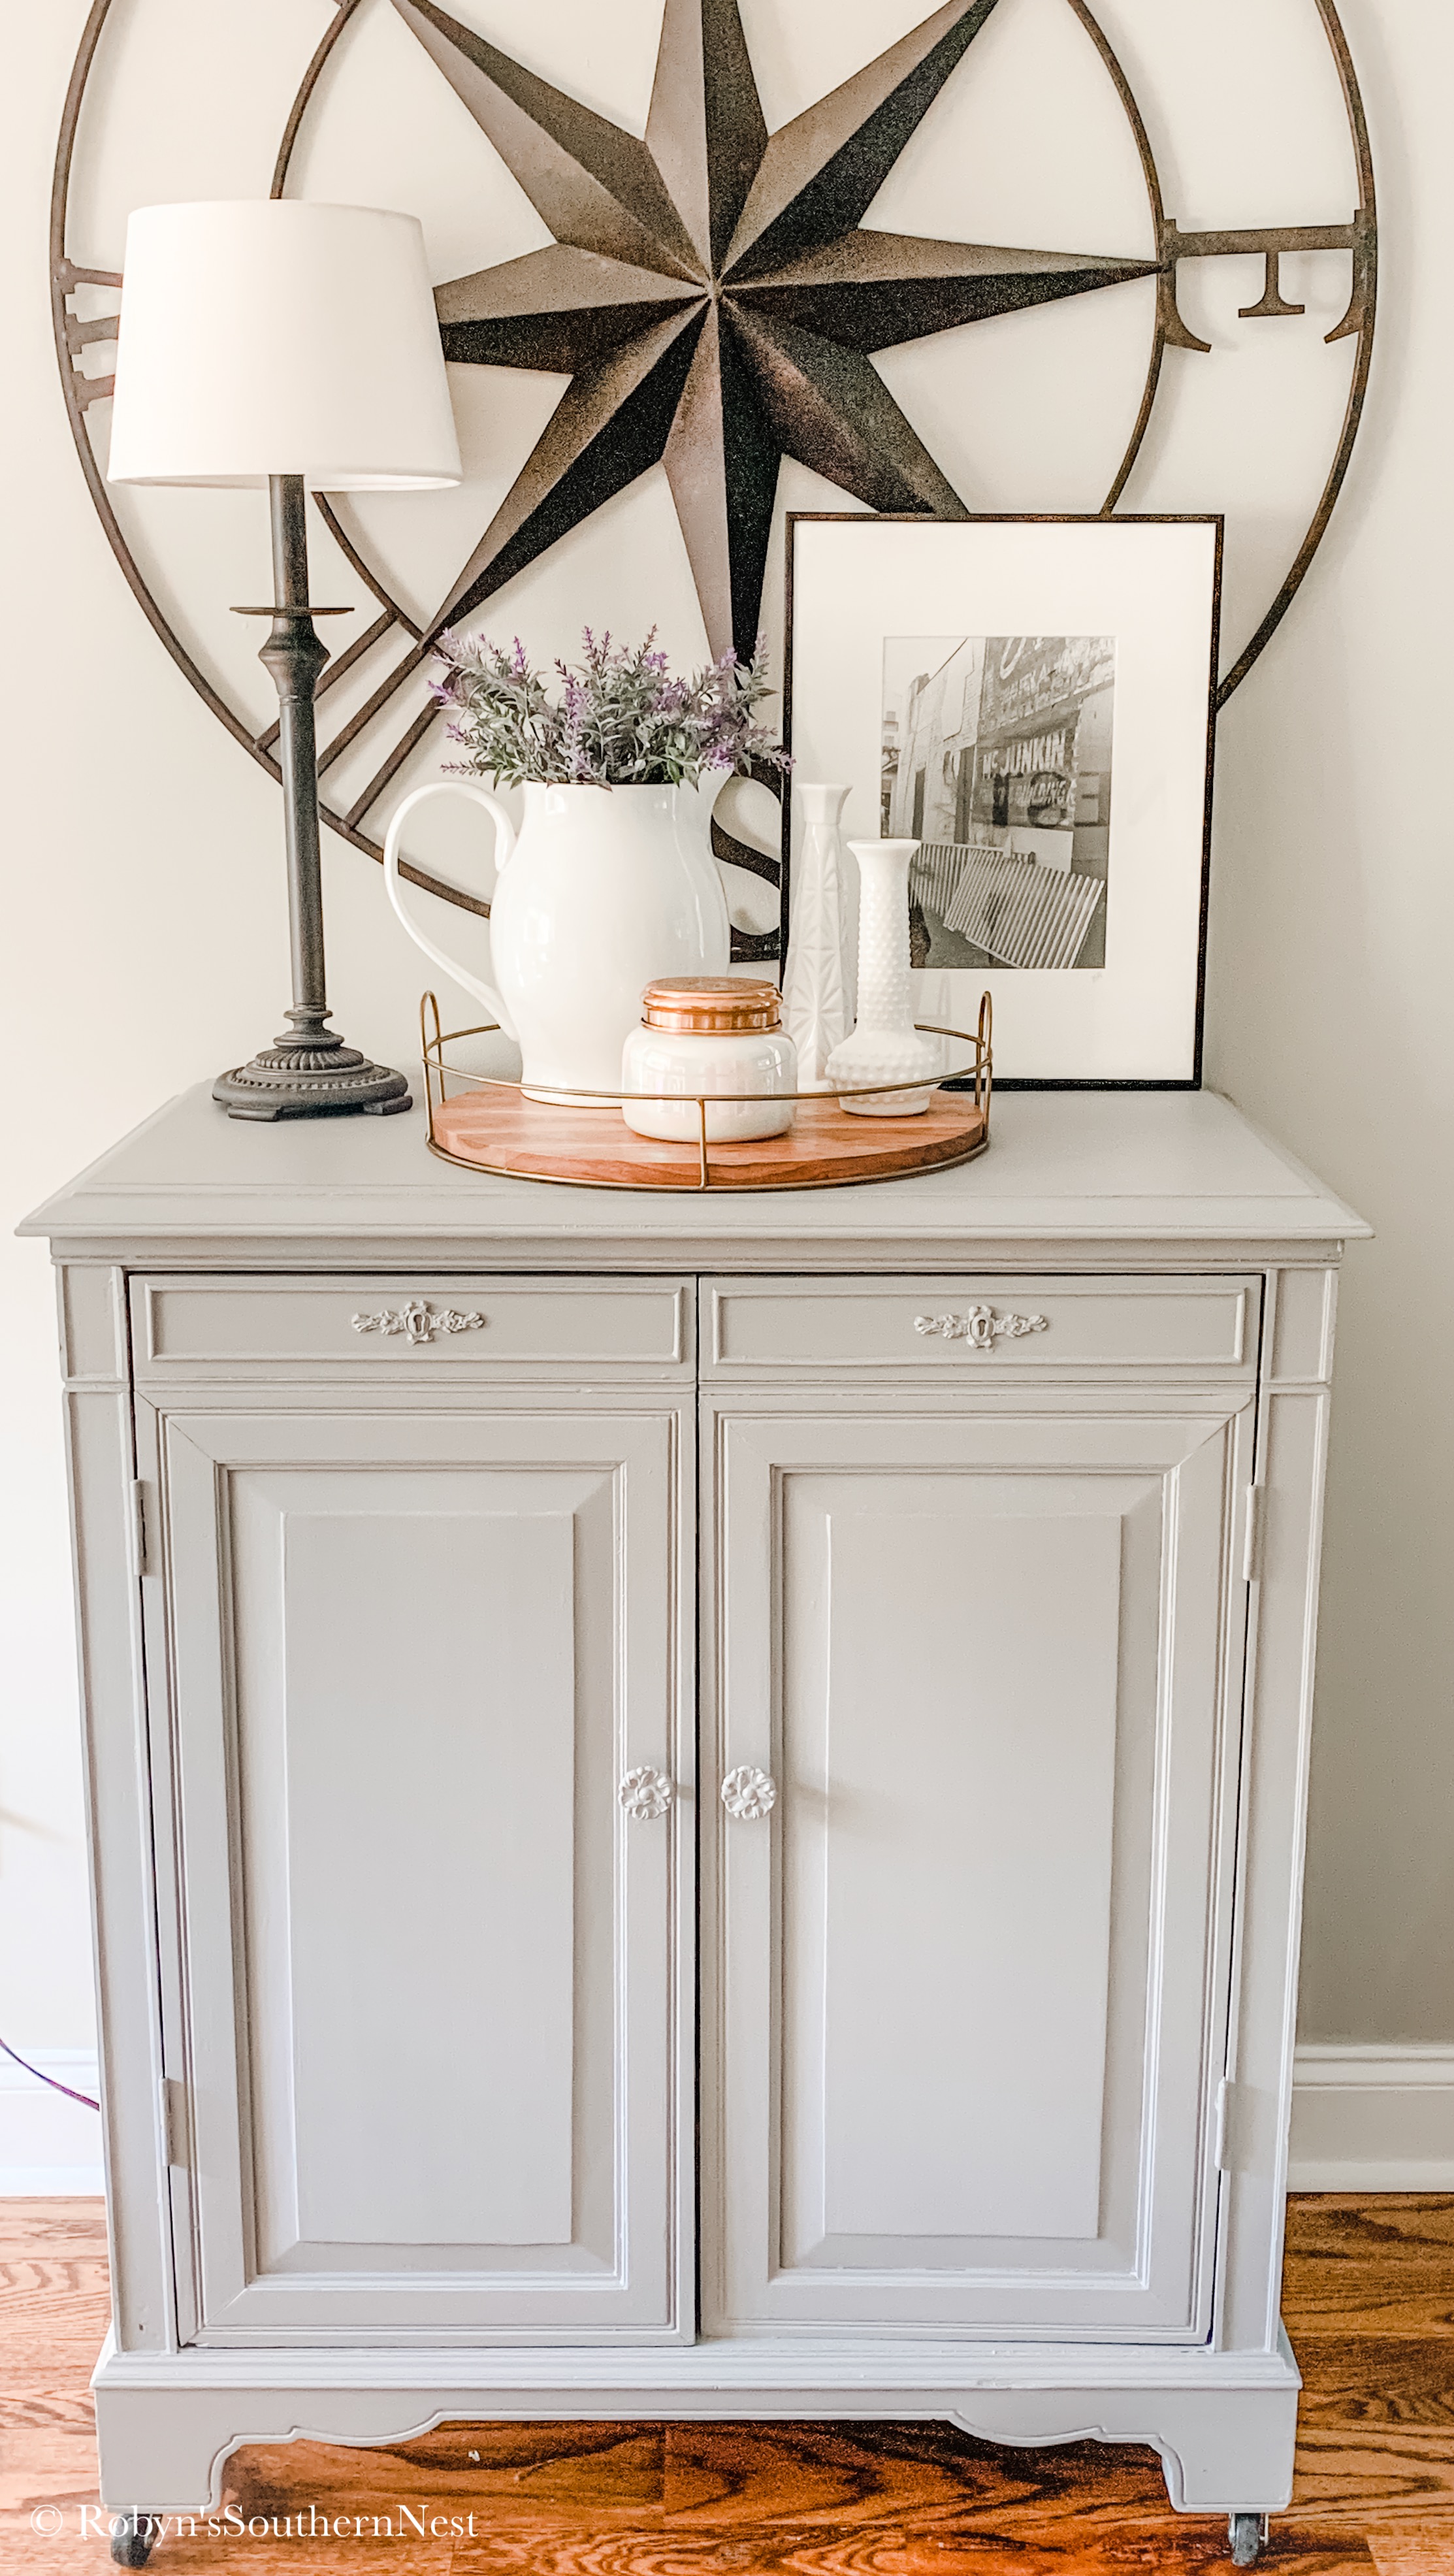 Fusion Mineral Paint Little Lamb • Robyn's Southern Nest